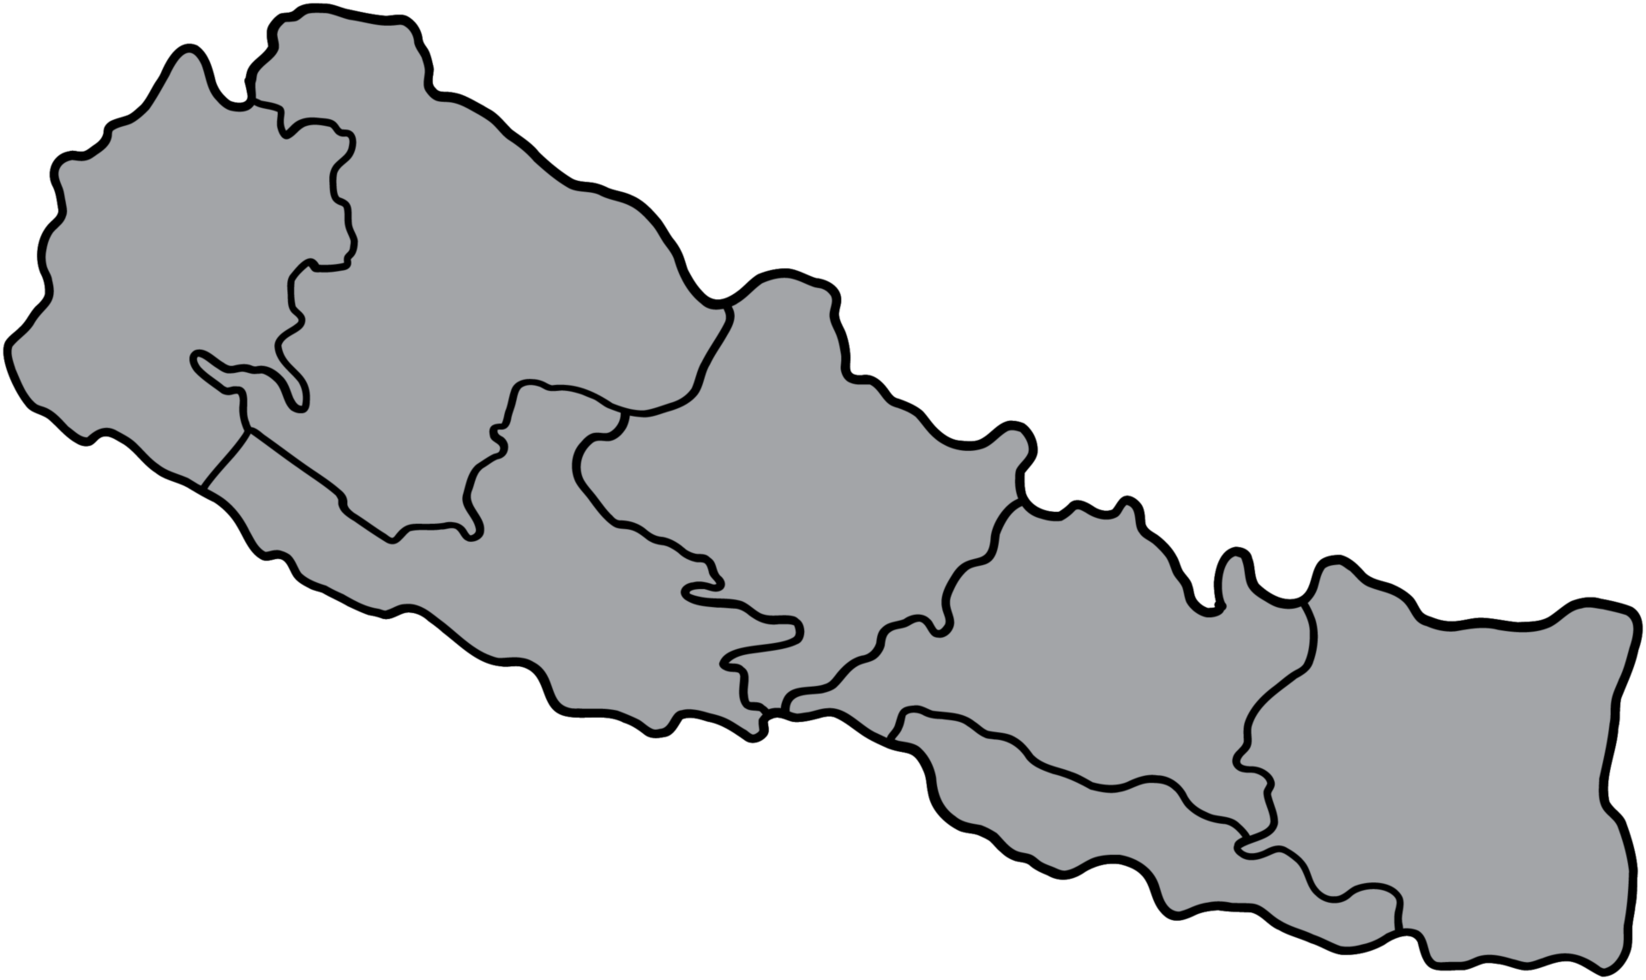 doodle freehand drawing of nepal map. png